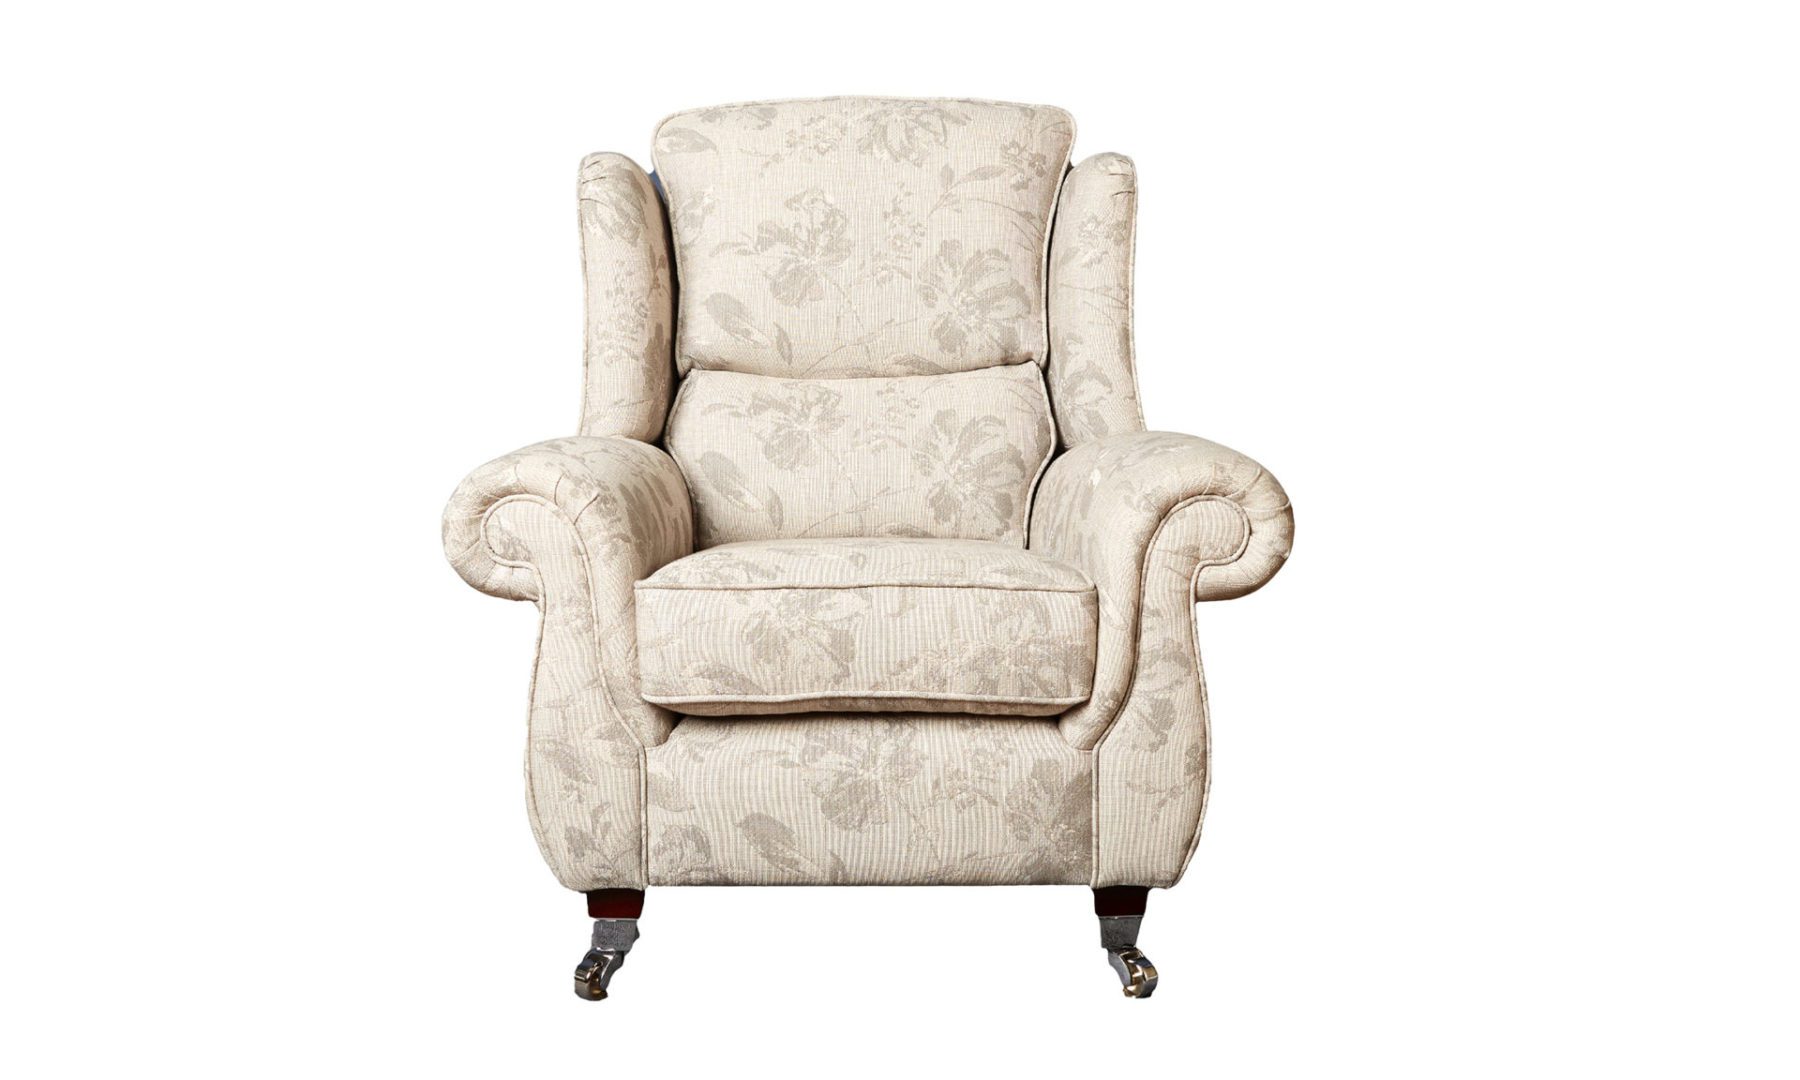 Greville Chair in Varadi Cinder Pattern, Silver Collection Fabric